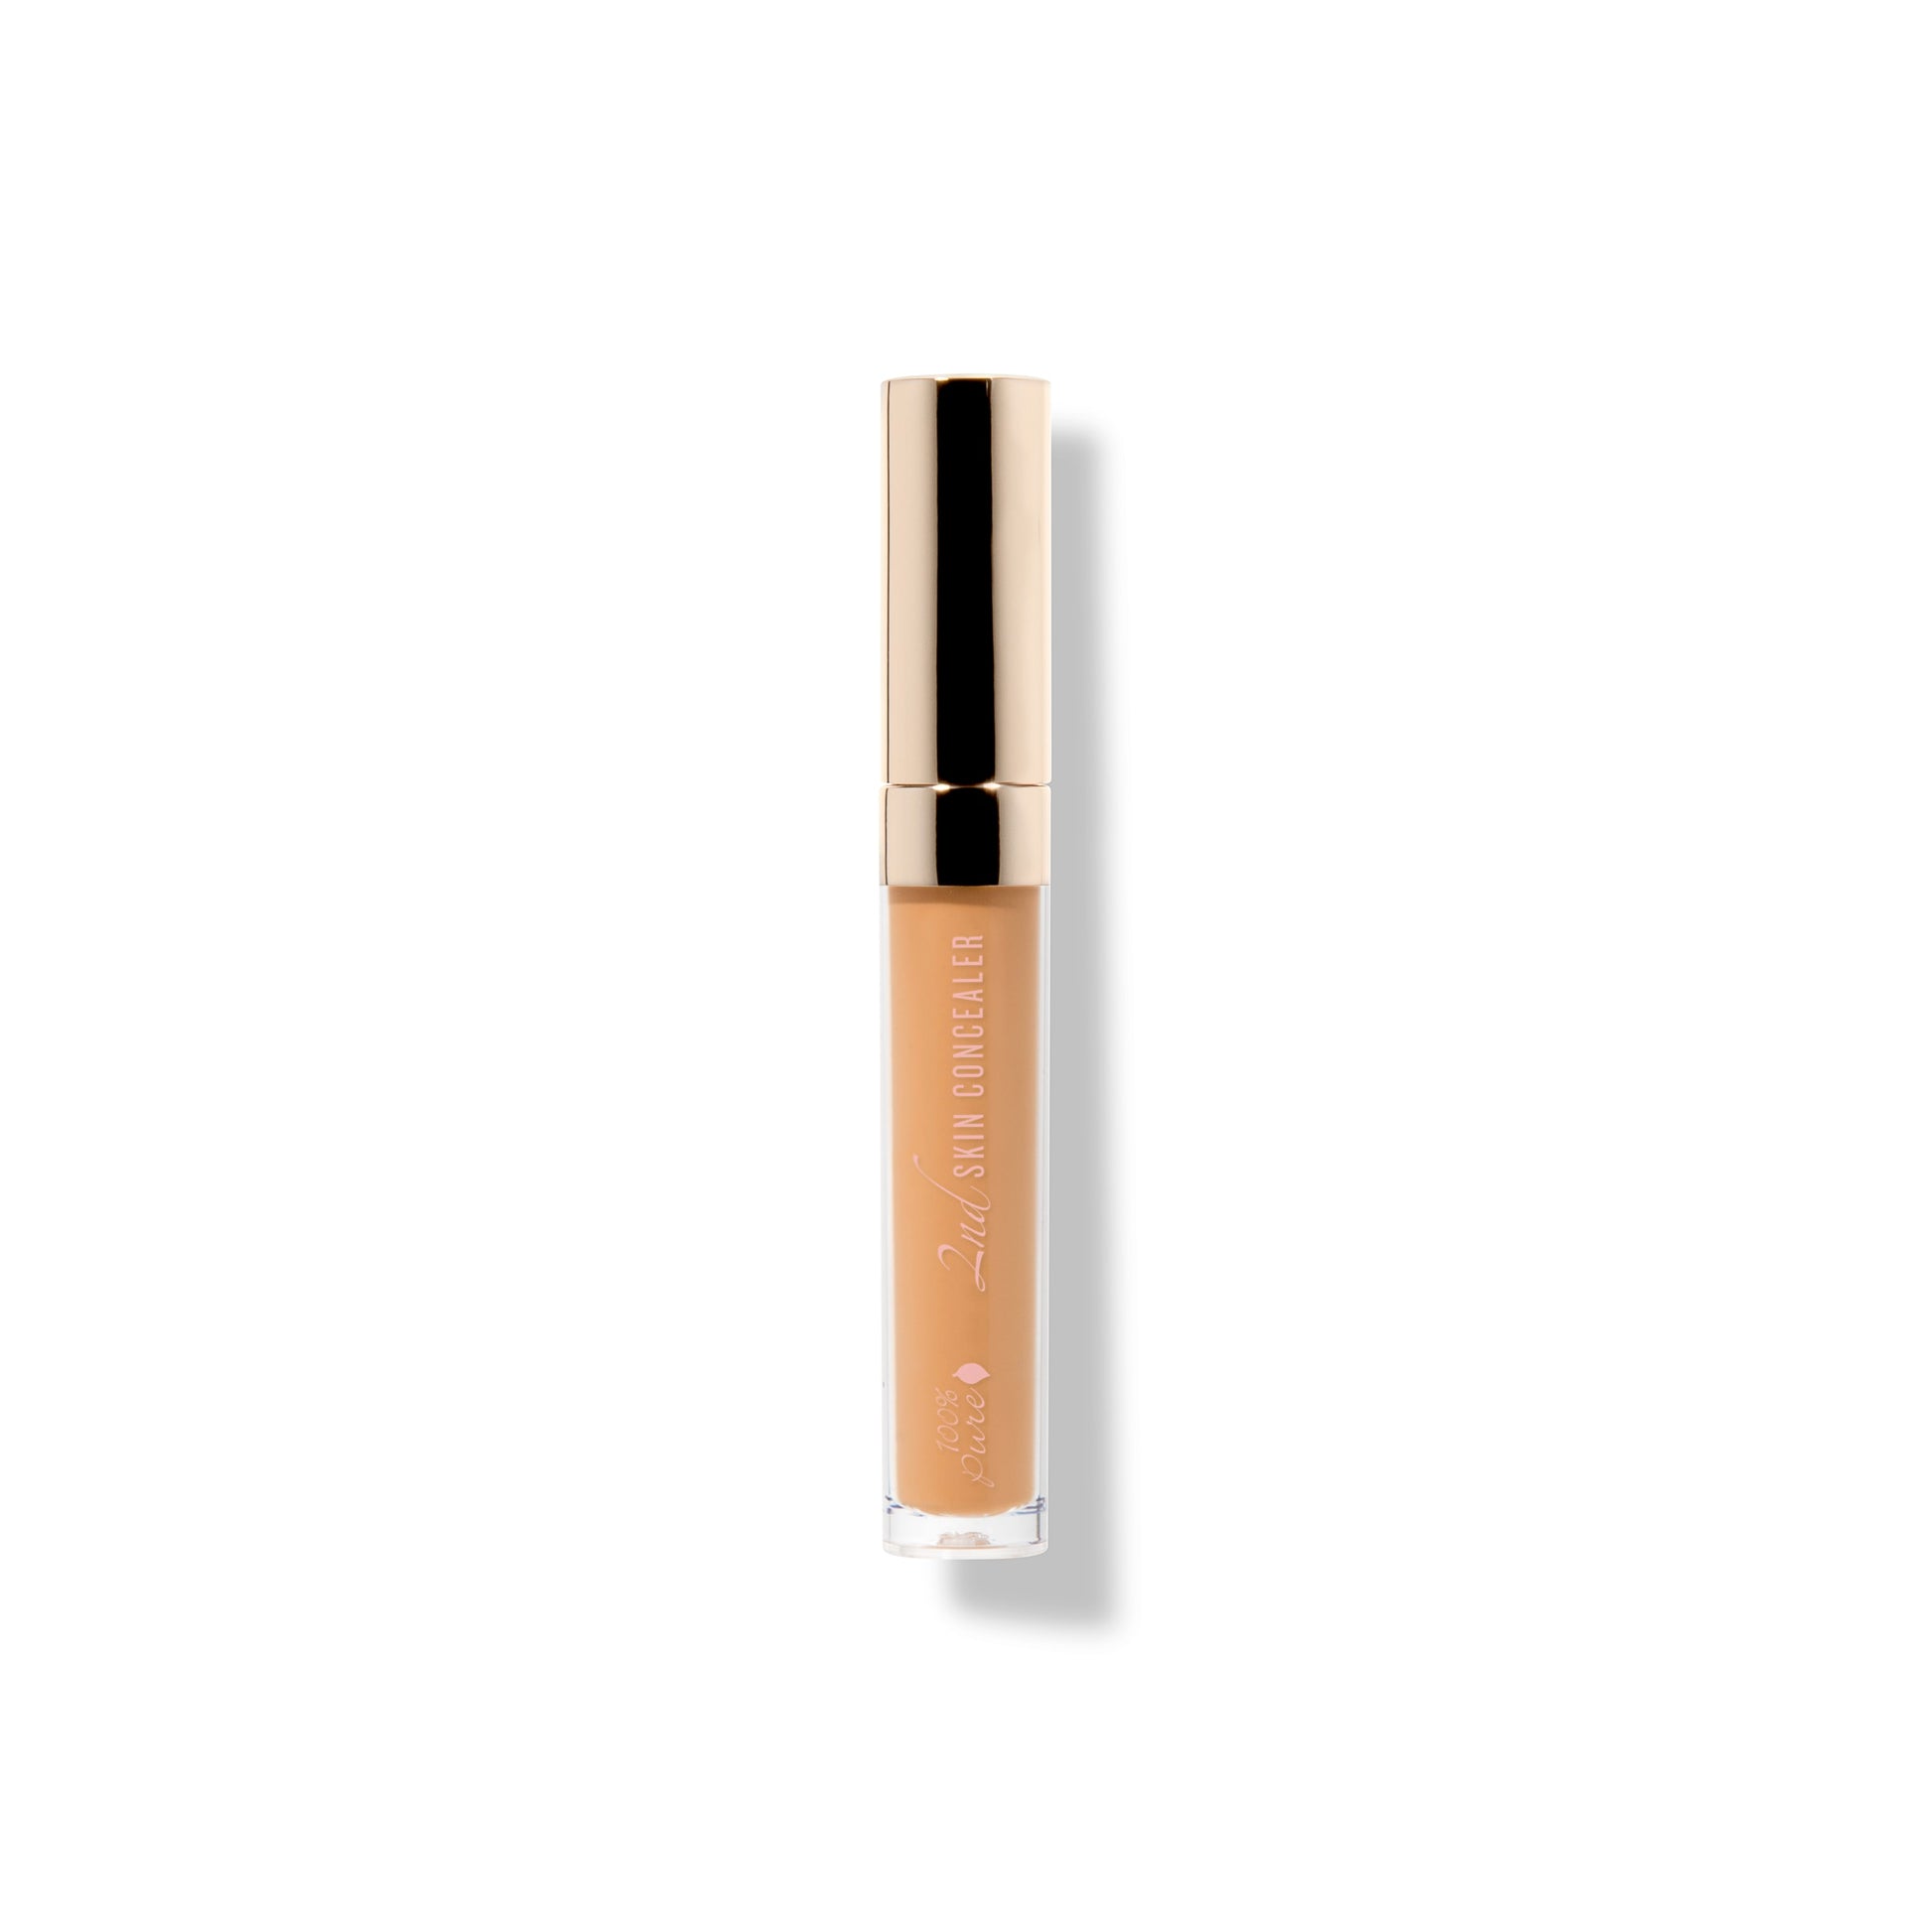 100% PURE Fruit Pigmented 2nd Skin Concealer shade 3